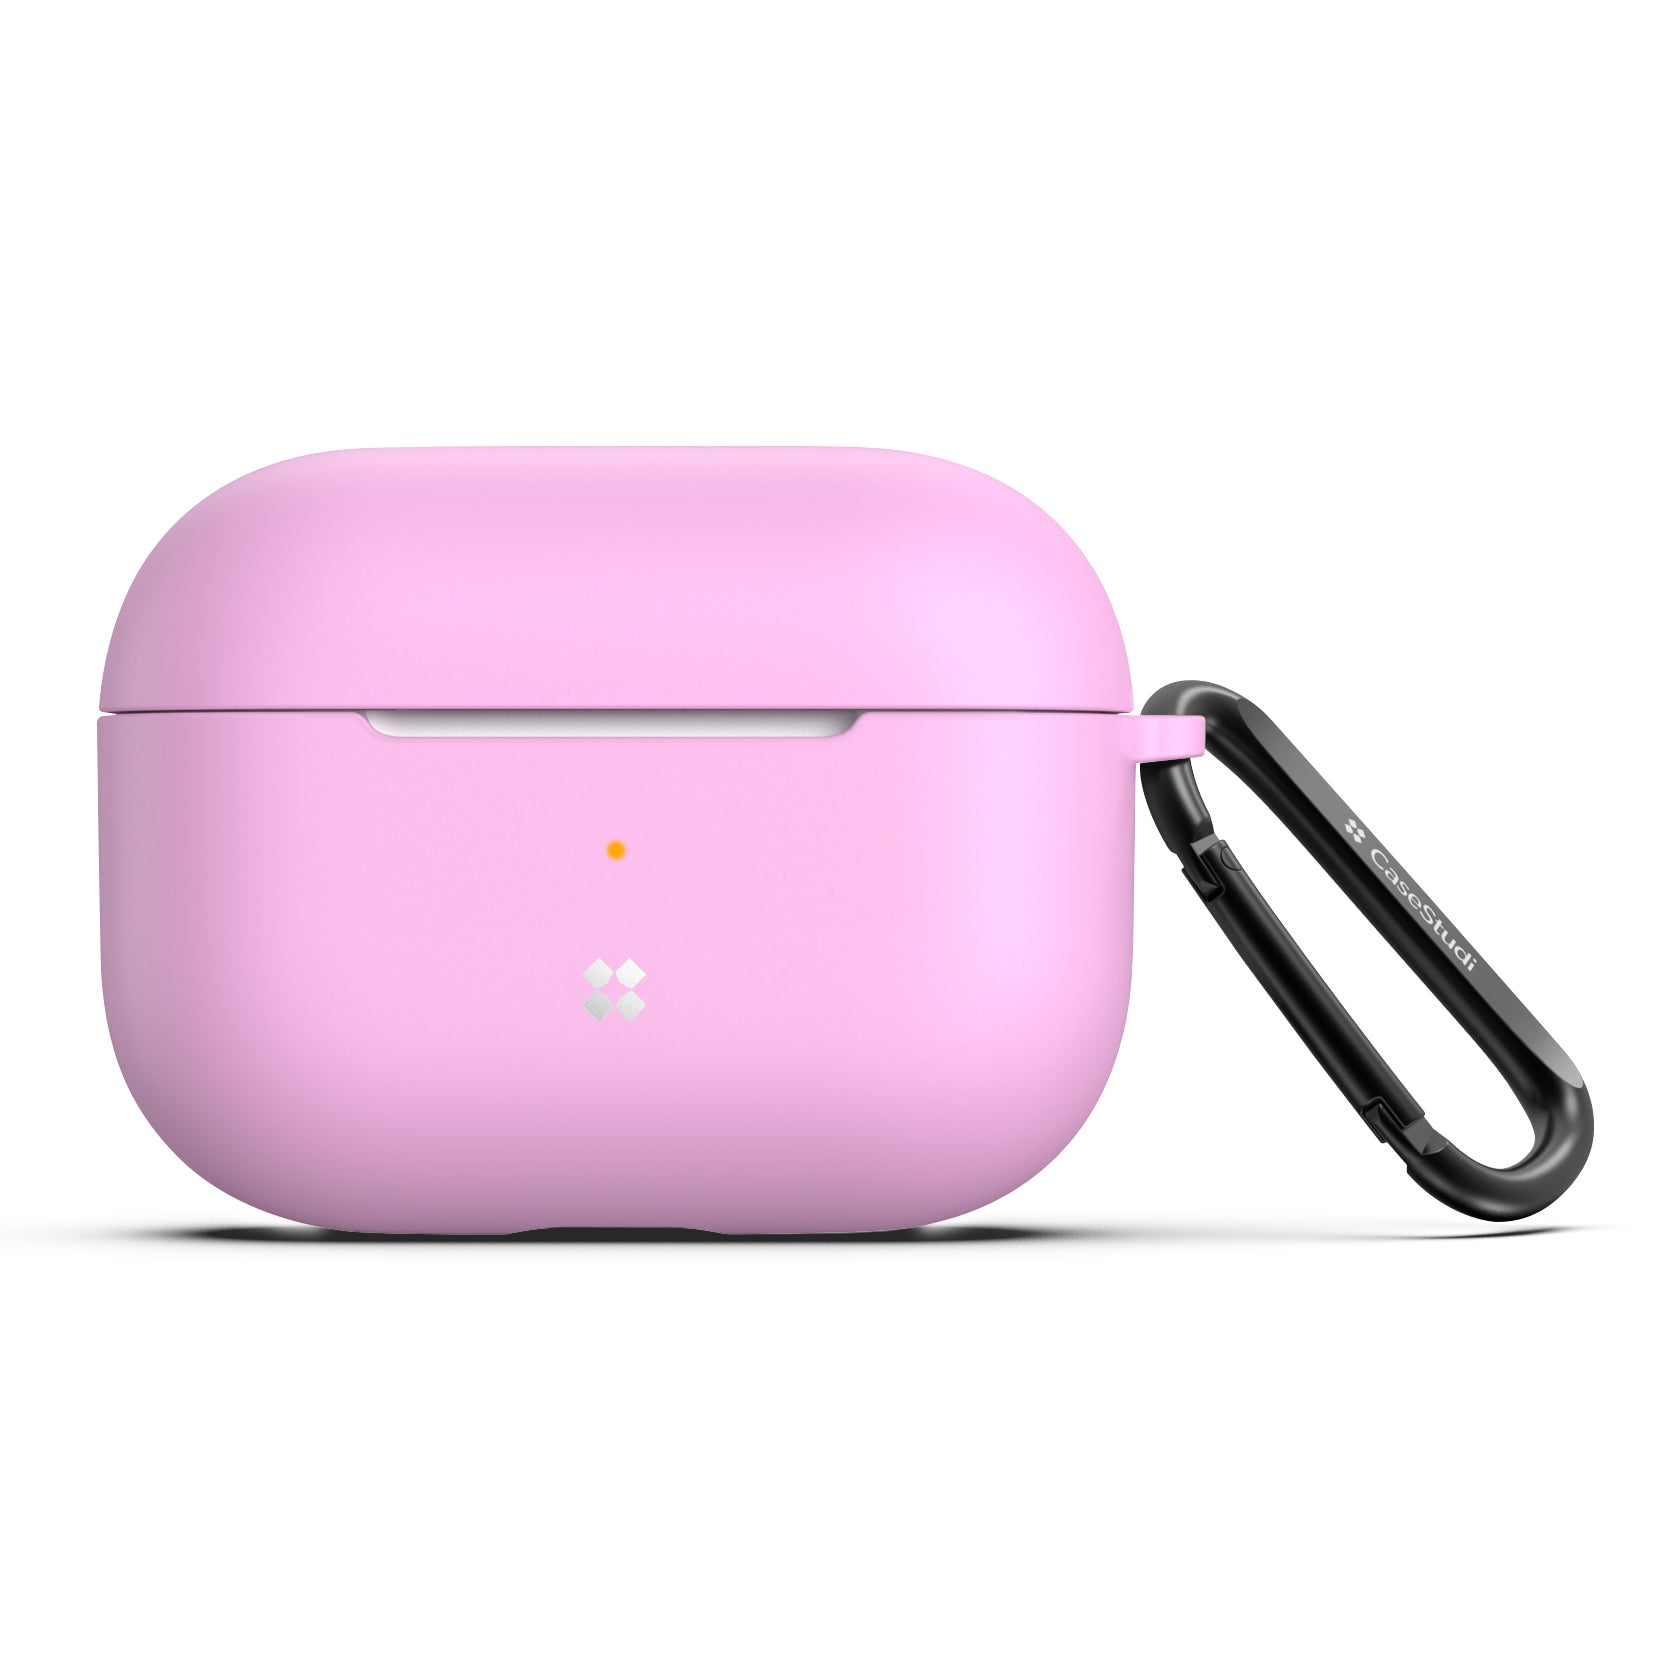 AIRPODS PRO ULTRA SLIM CASE: PINK